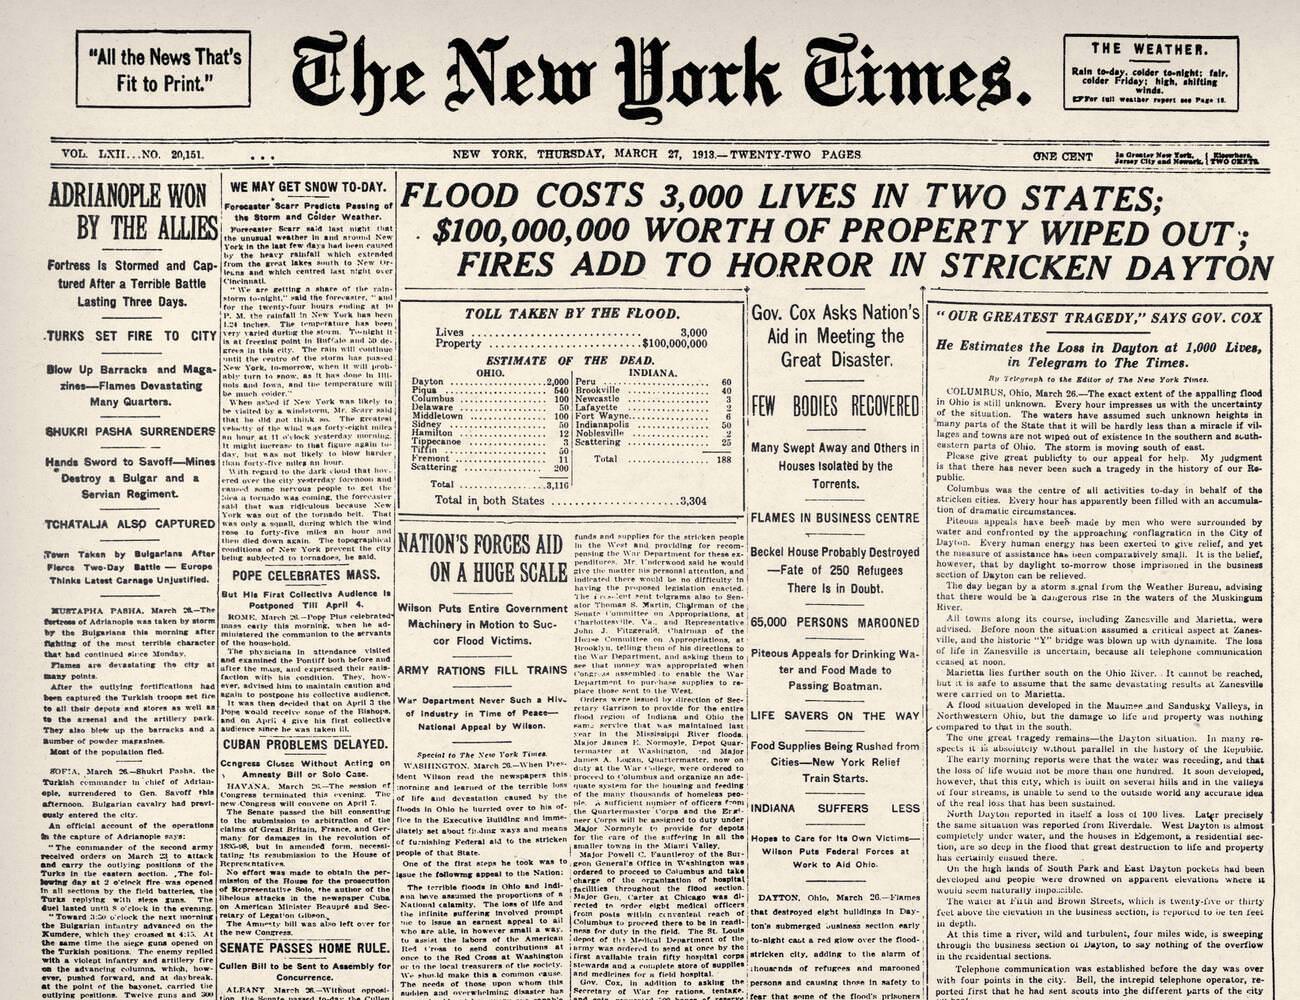 Front page of "The New York Times" of March 26, 1913, reporting the floods in Ohio and Indiana.